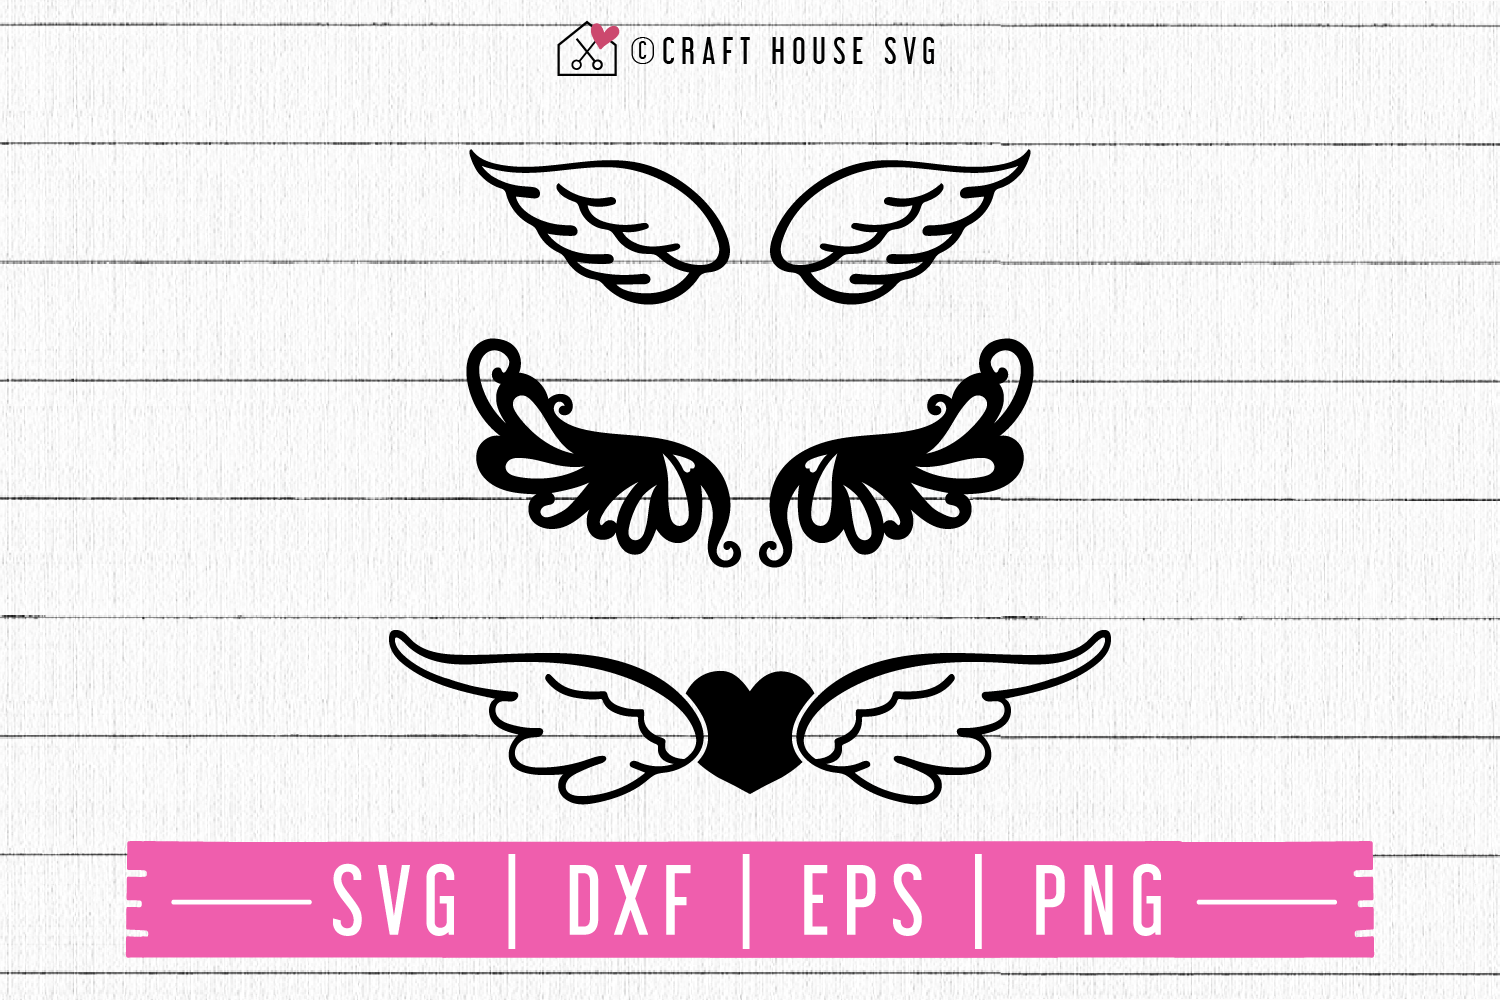 FREE Angel wings SVG | FB92 Craft House SVG - SVG files for Cricut and Silhouette